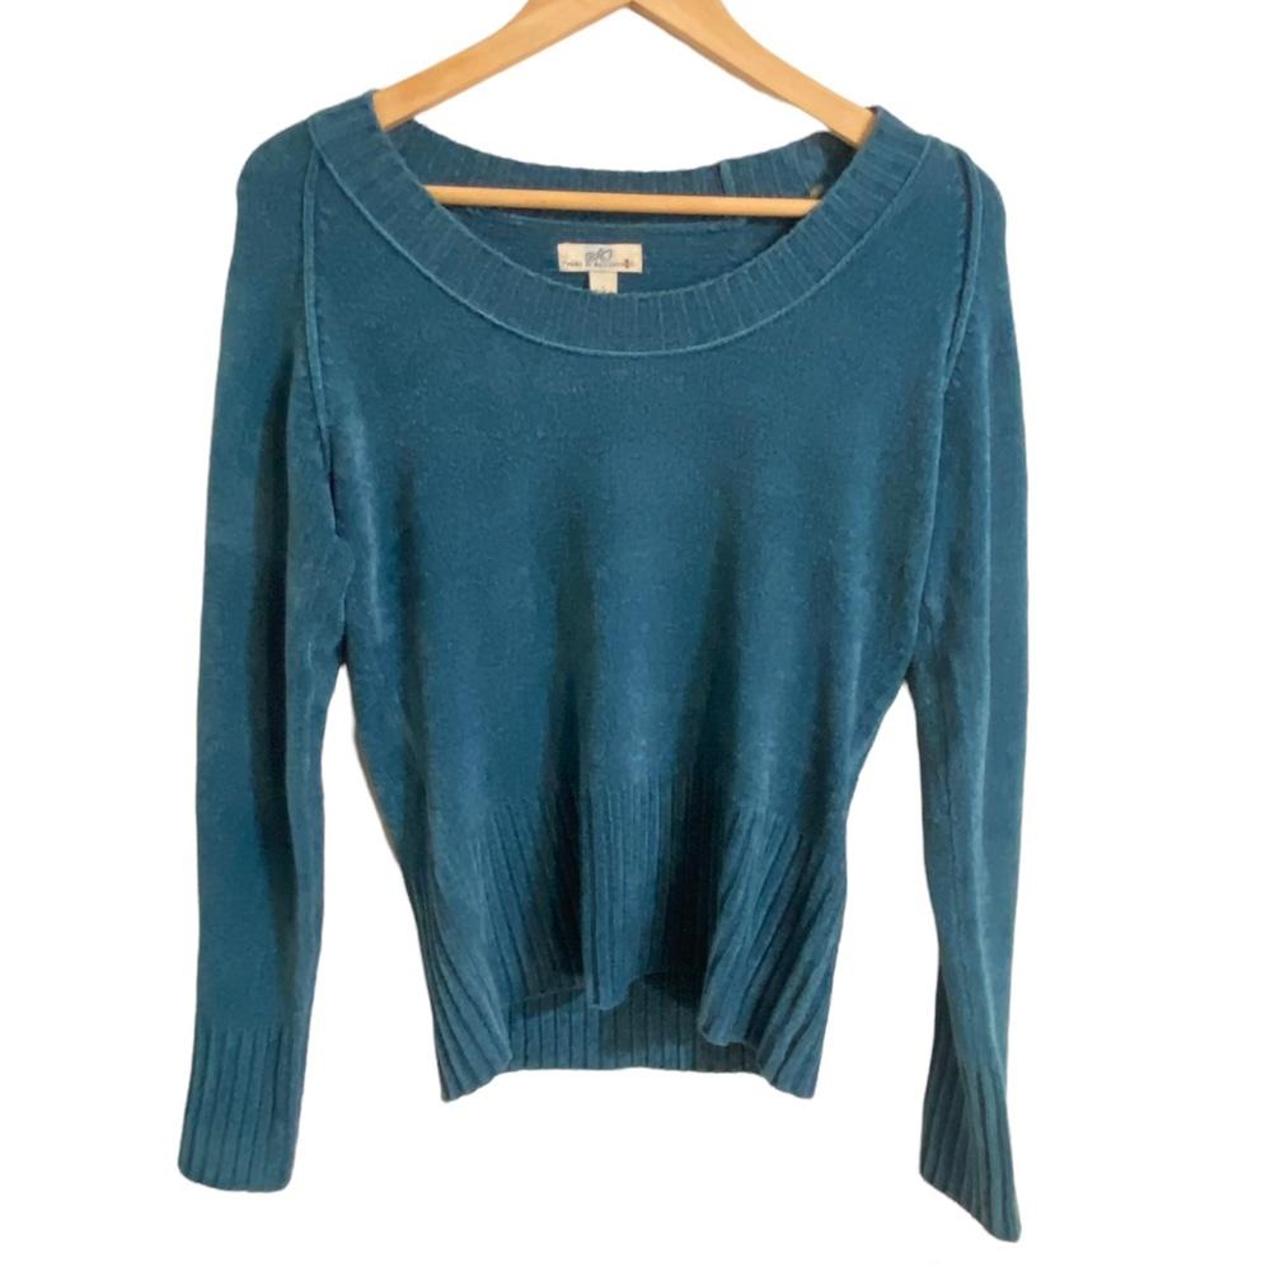 Product Image 1 - Y2K Teal Sweater Top

Cute teal